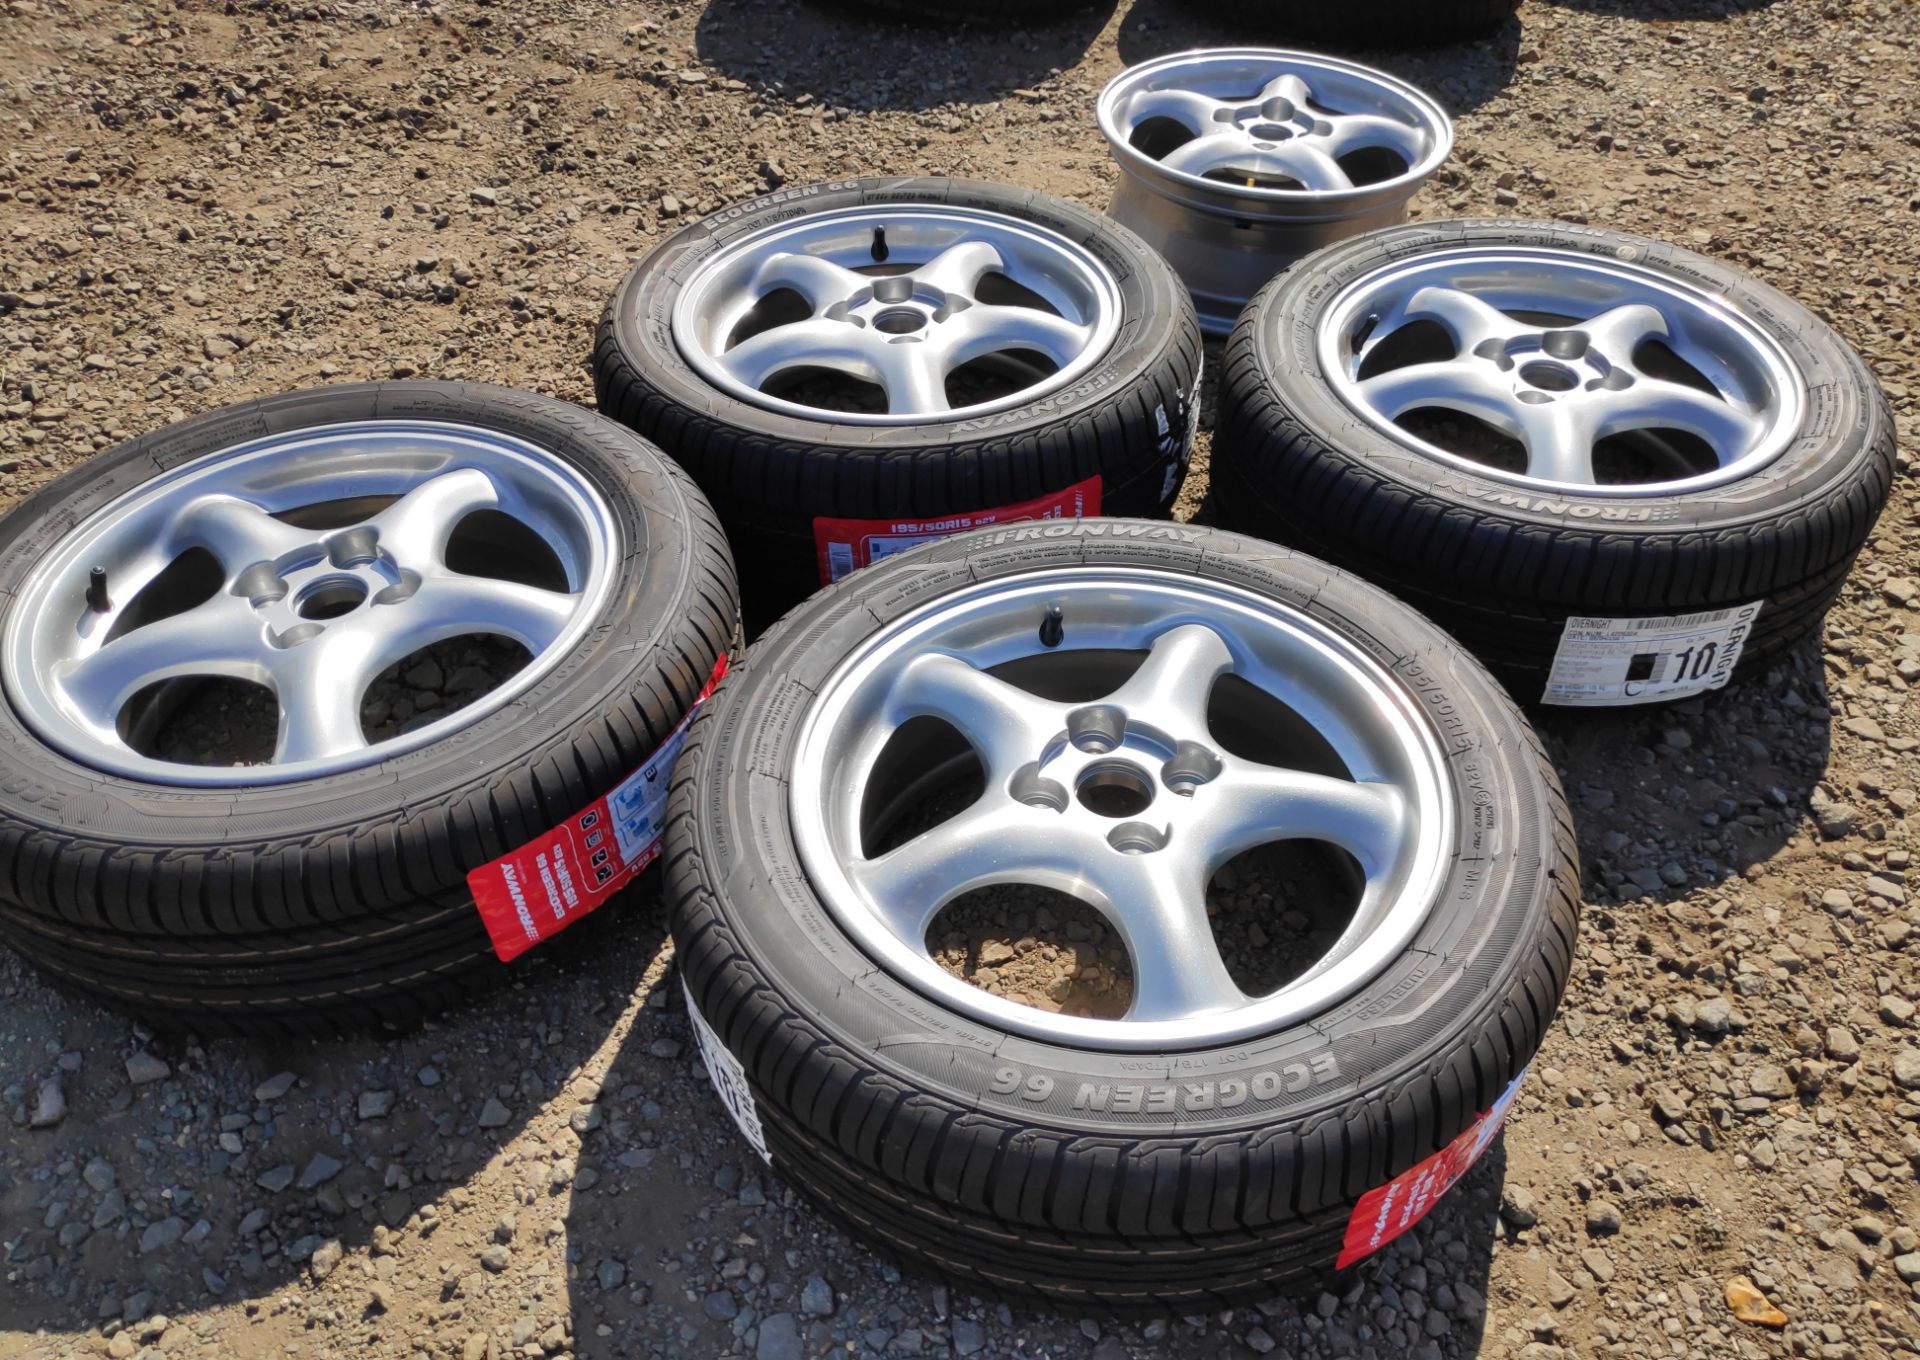 5 x Silver 5-Spoke 16x6 ET40 Standard Lightweight MX5 Wheels - 4 With New Tyres - CL682 - - Image 11 of 17